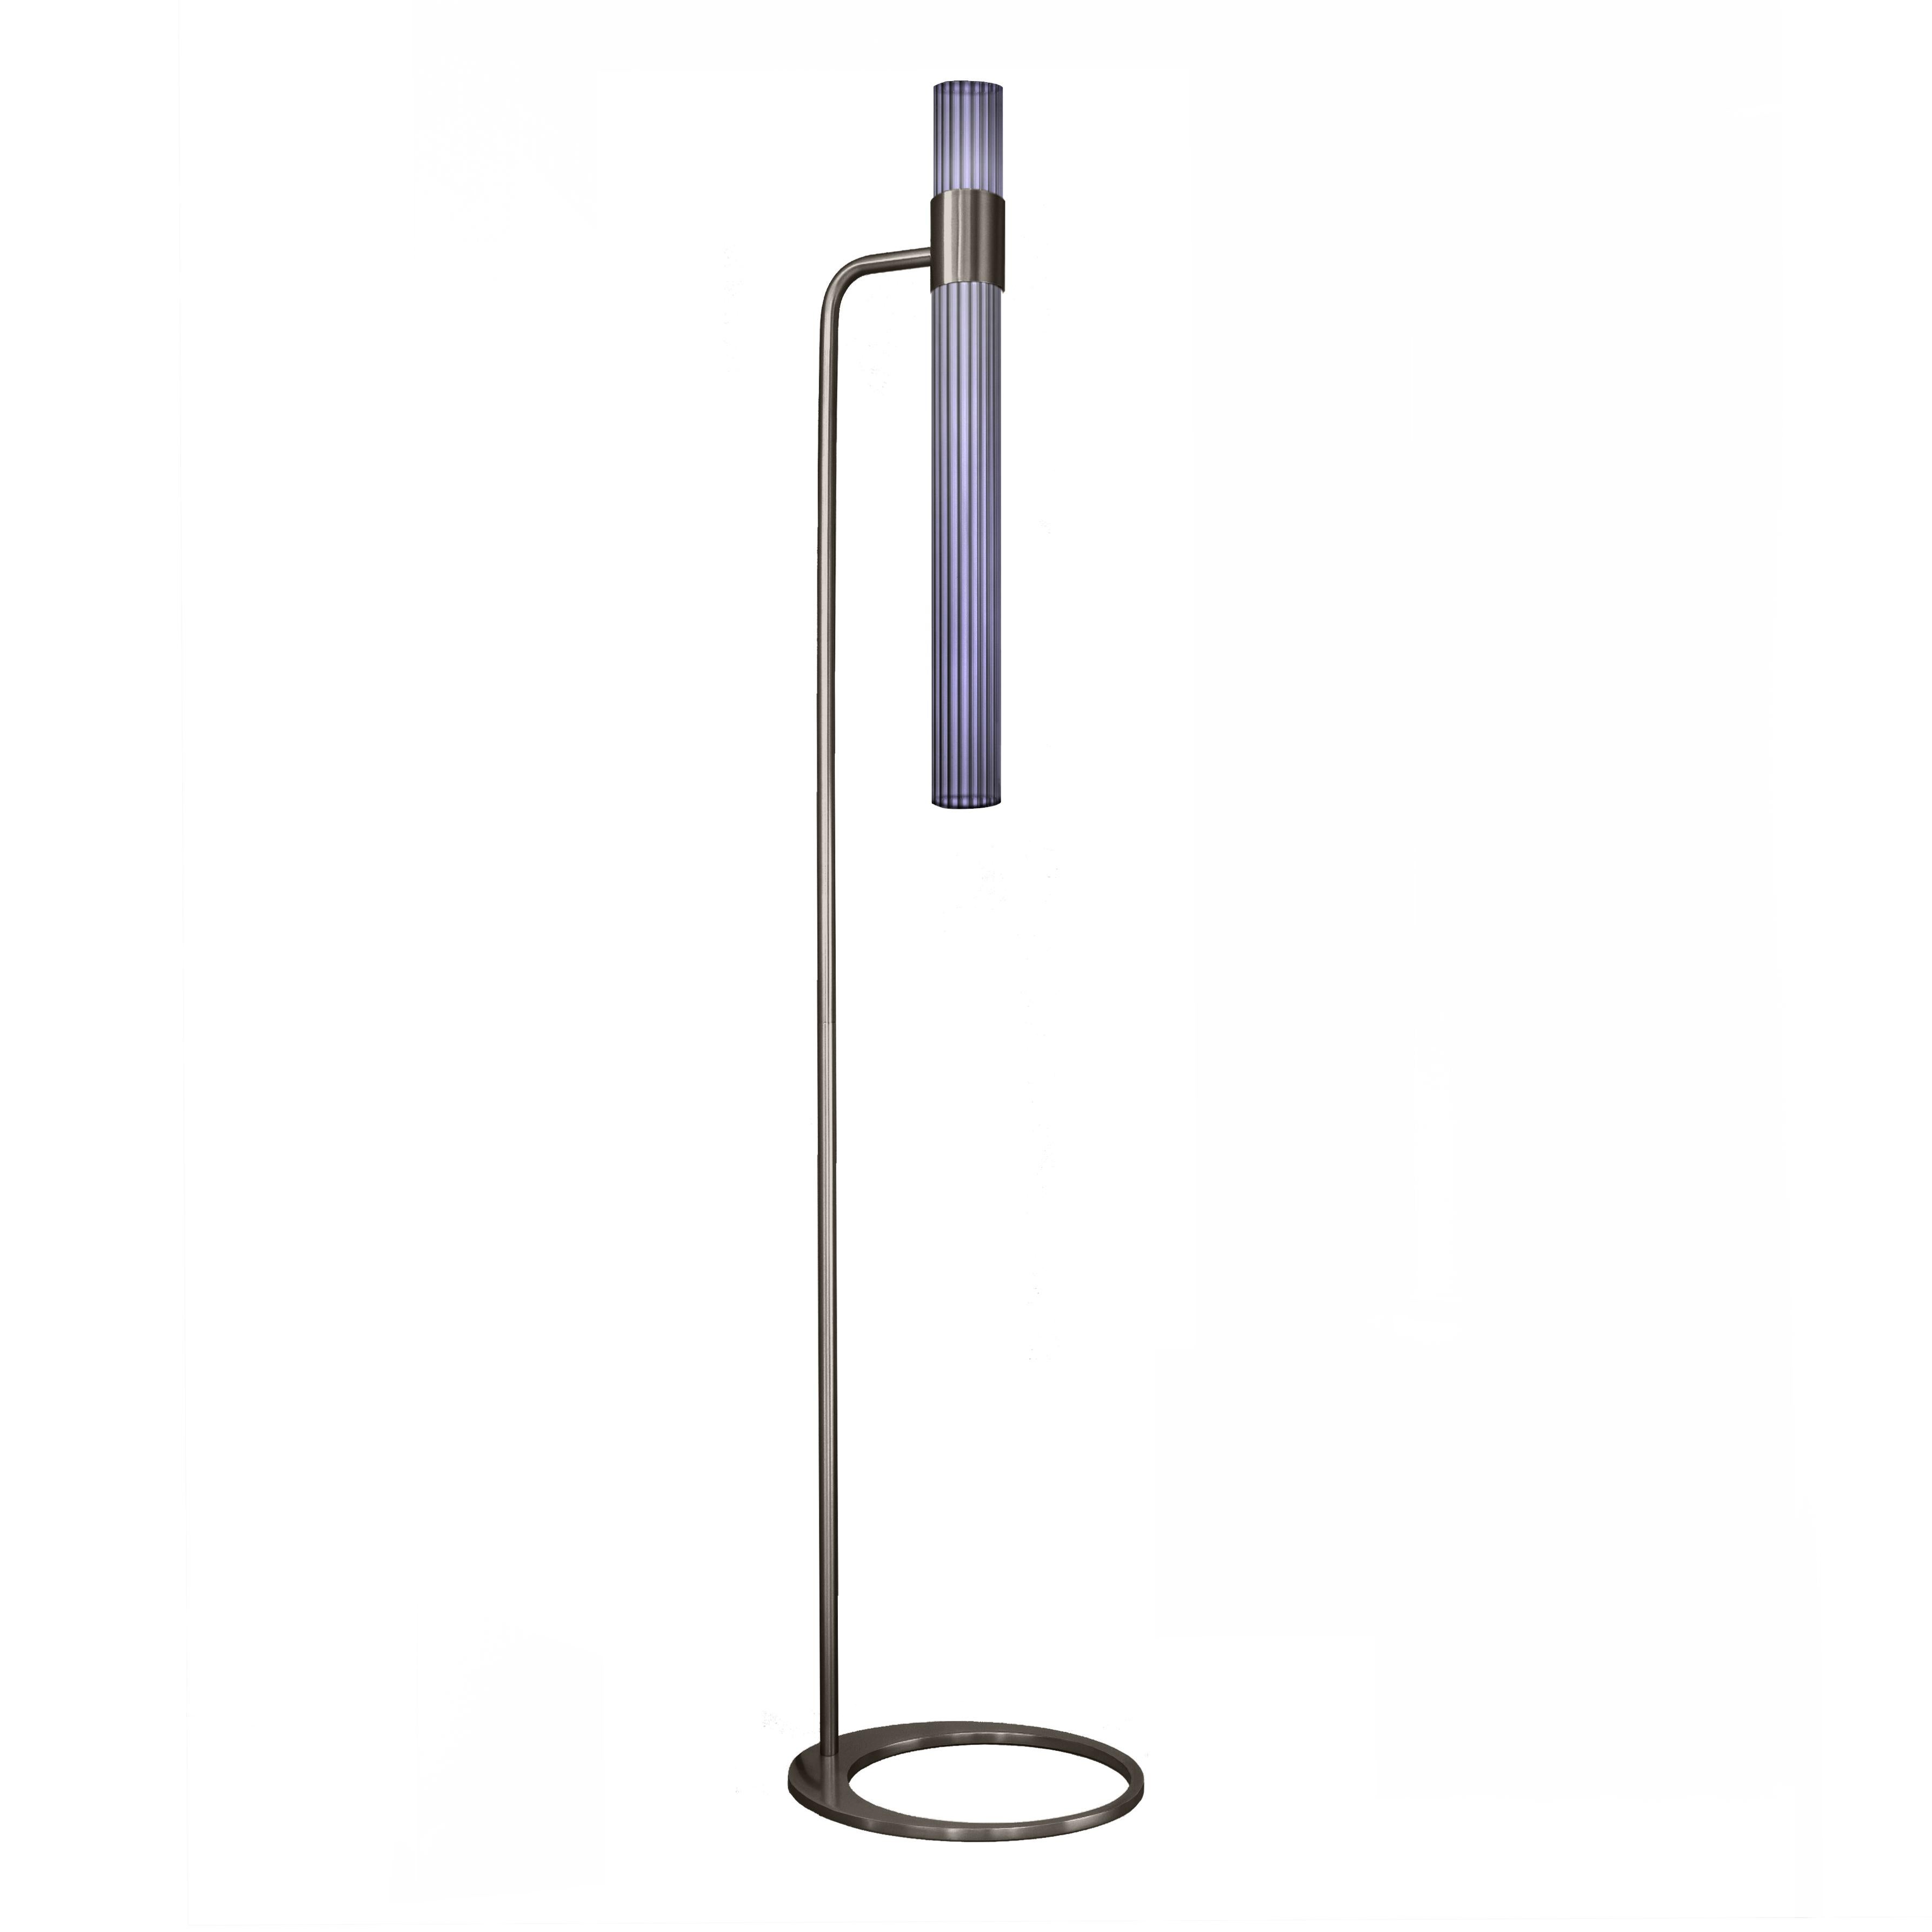 Sbarlusc floor lamp by LUCE TU
Dimensions: 149 x 32.5 cm
Materials: Brass and glass

Sbarlusc in Milanese dialect represents the sparkle of a precious and very bright object. The colored glasses, which combine with each other creating games of